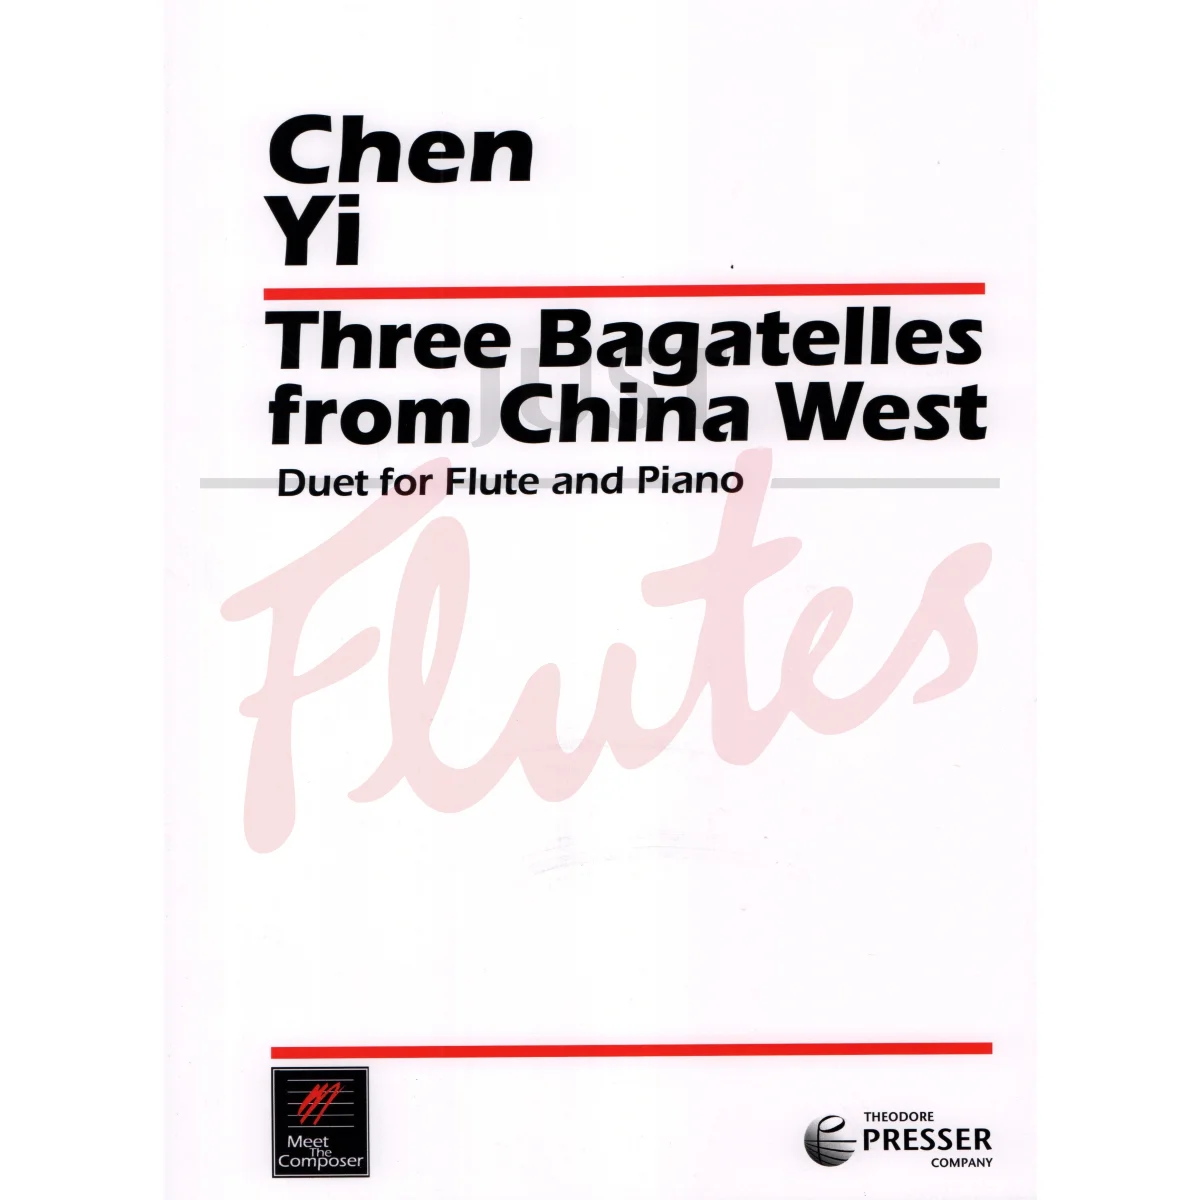 Three Bagatelles from China West for Flute and Piano